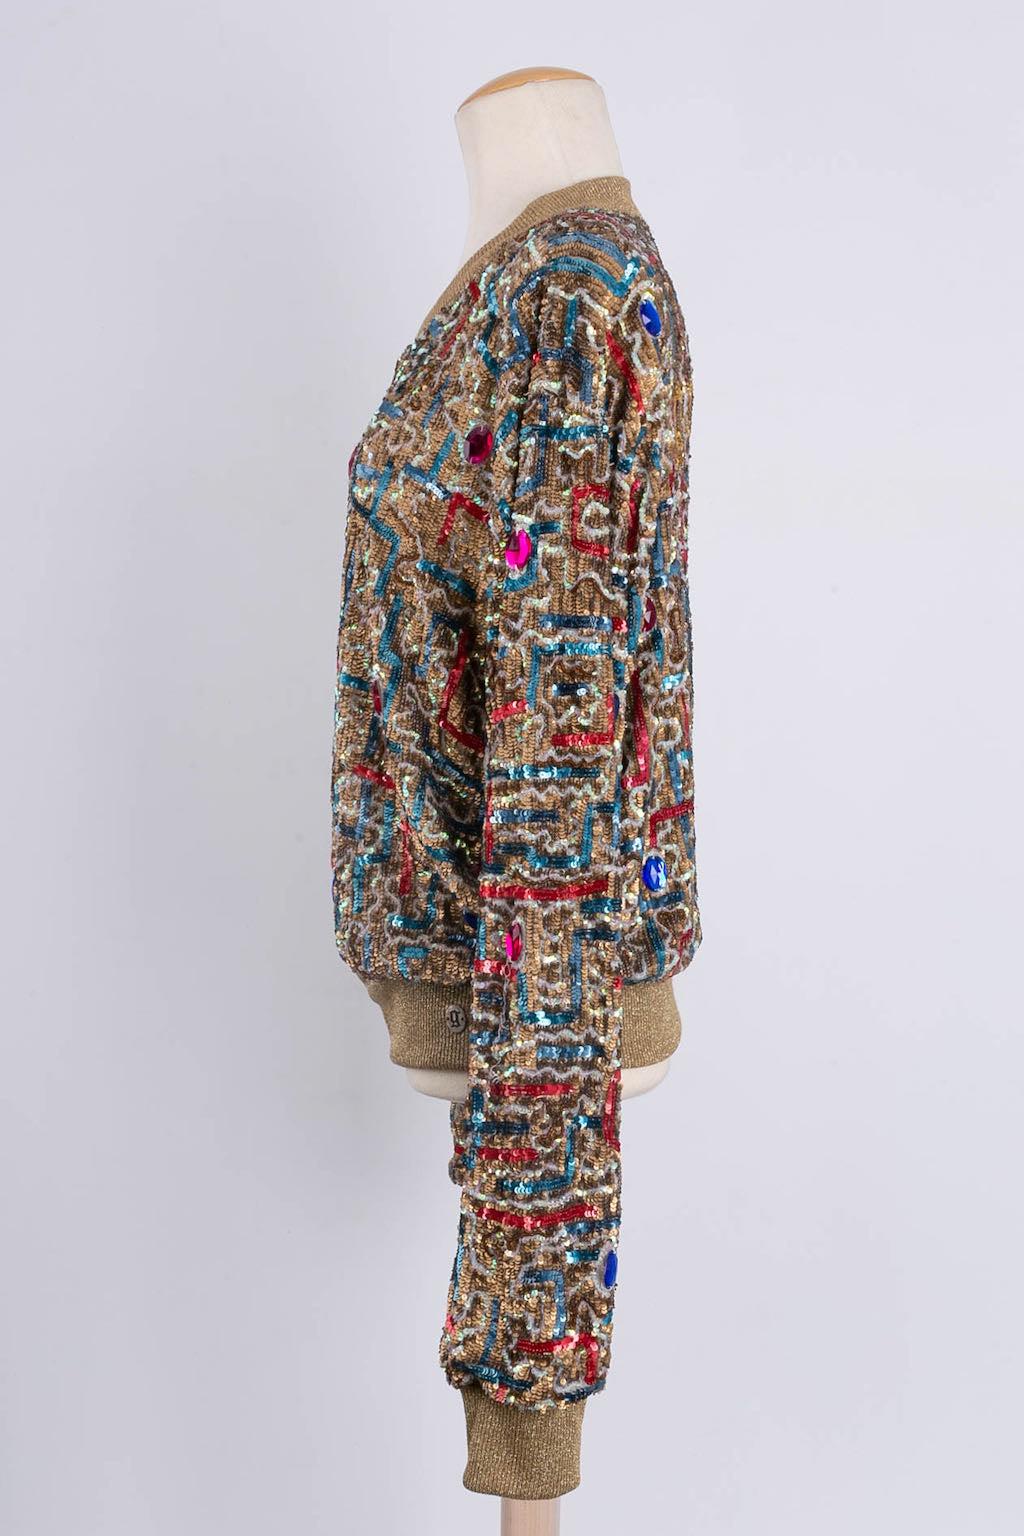 John Galliano (Made in India) Bombers-style jacket composed of tulle embroidered with sequins. Size 38FR.

Additional information: 
Dimensions: Shoulders: 54 cm (21.25